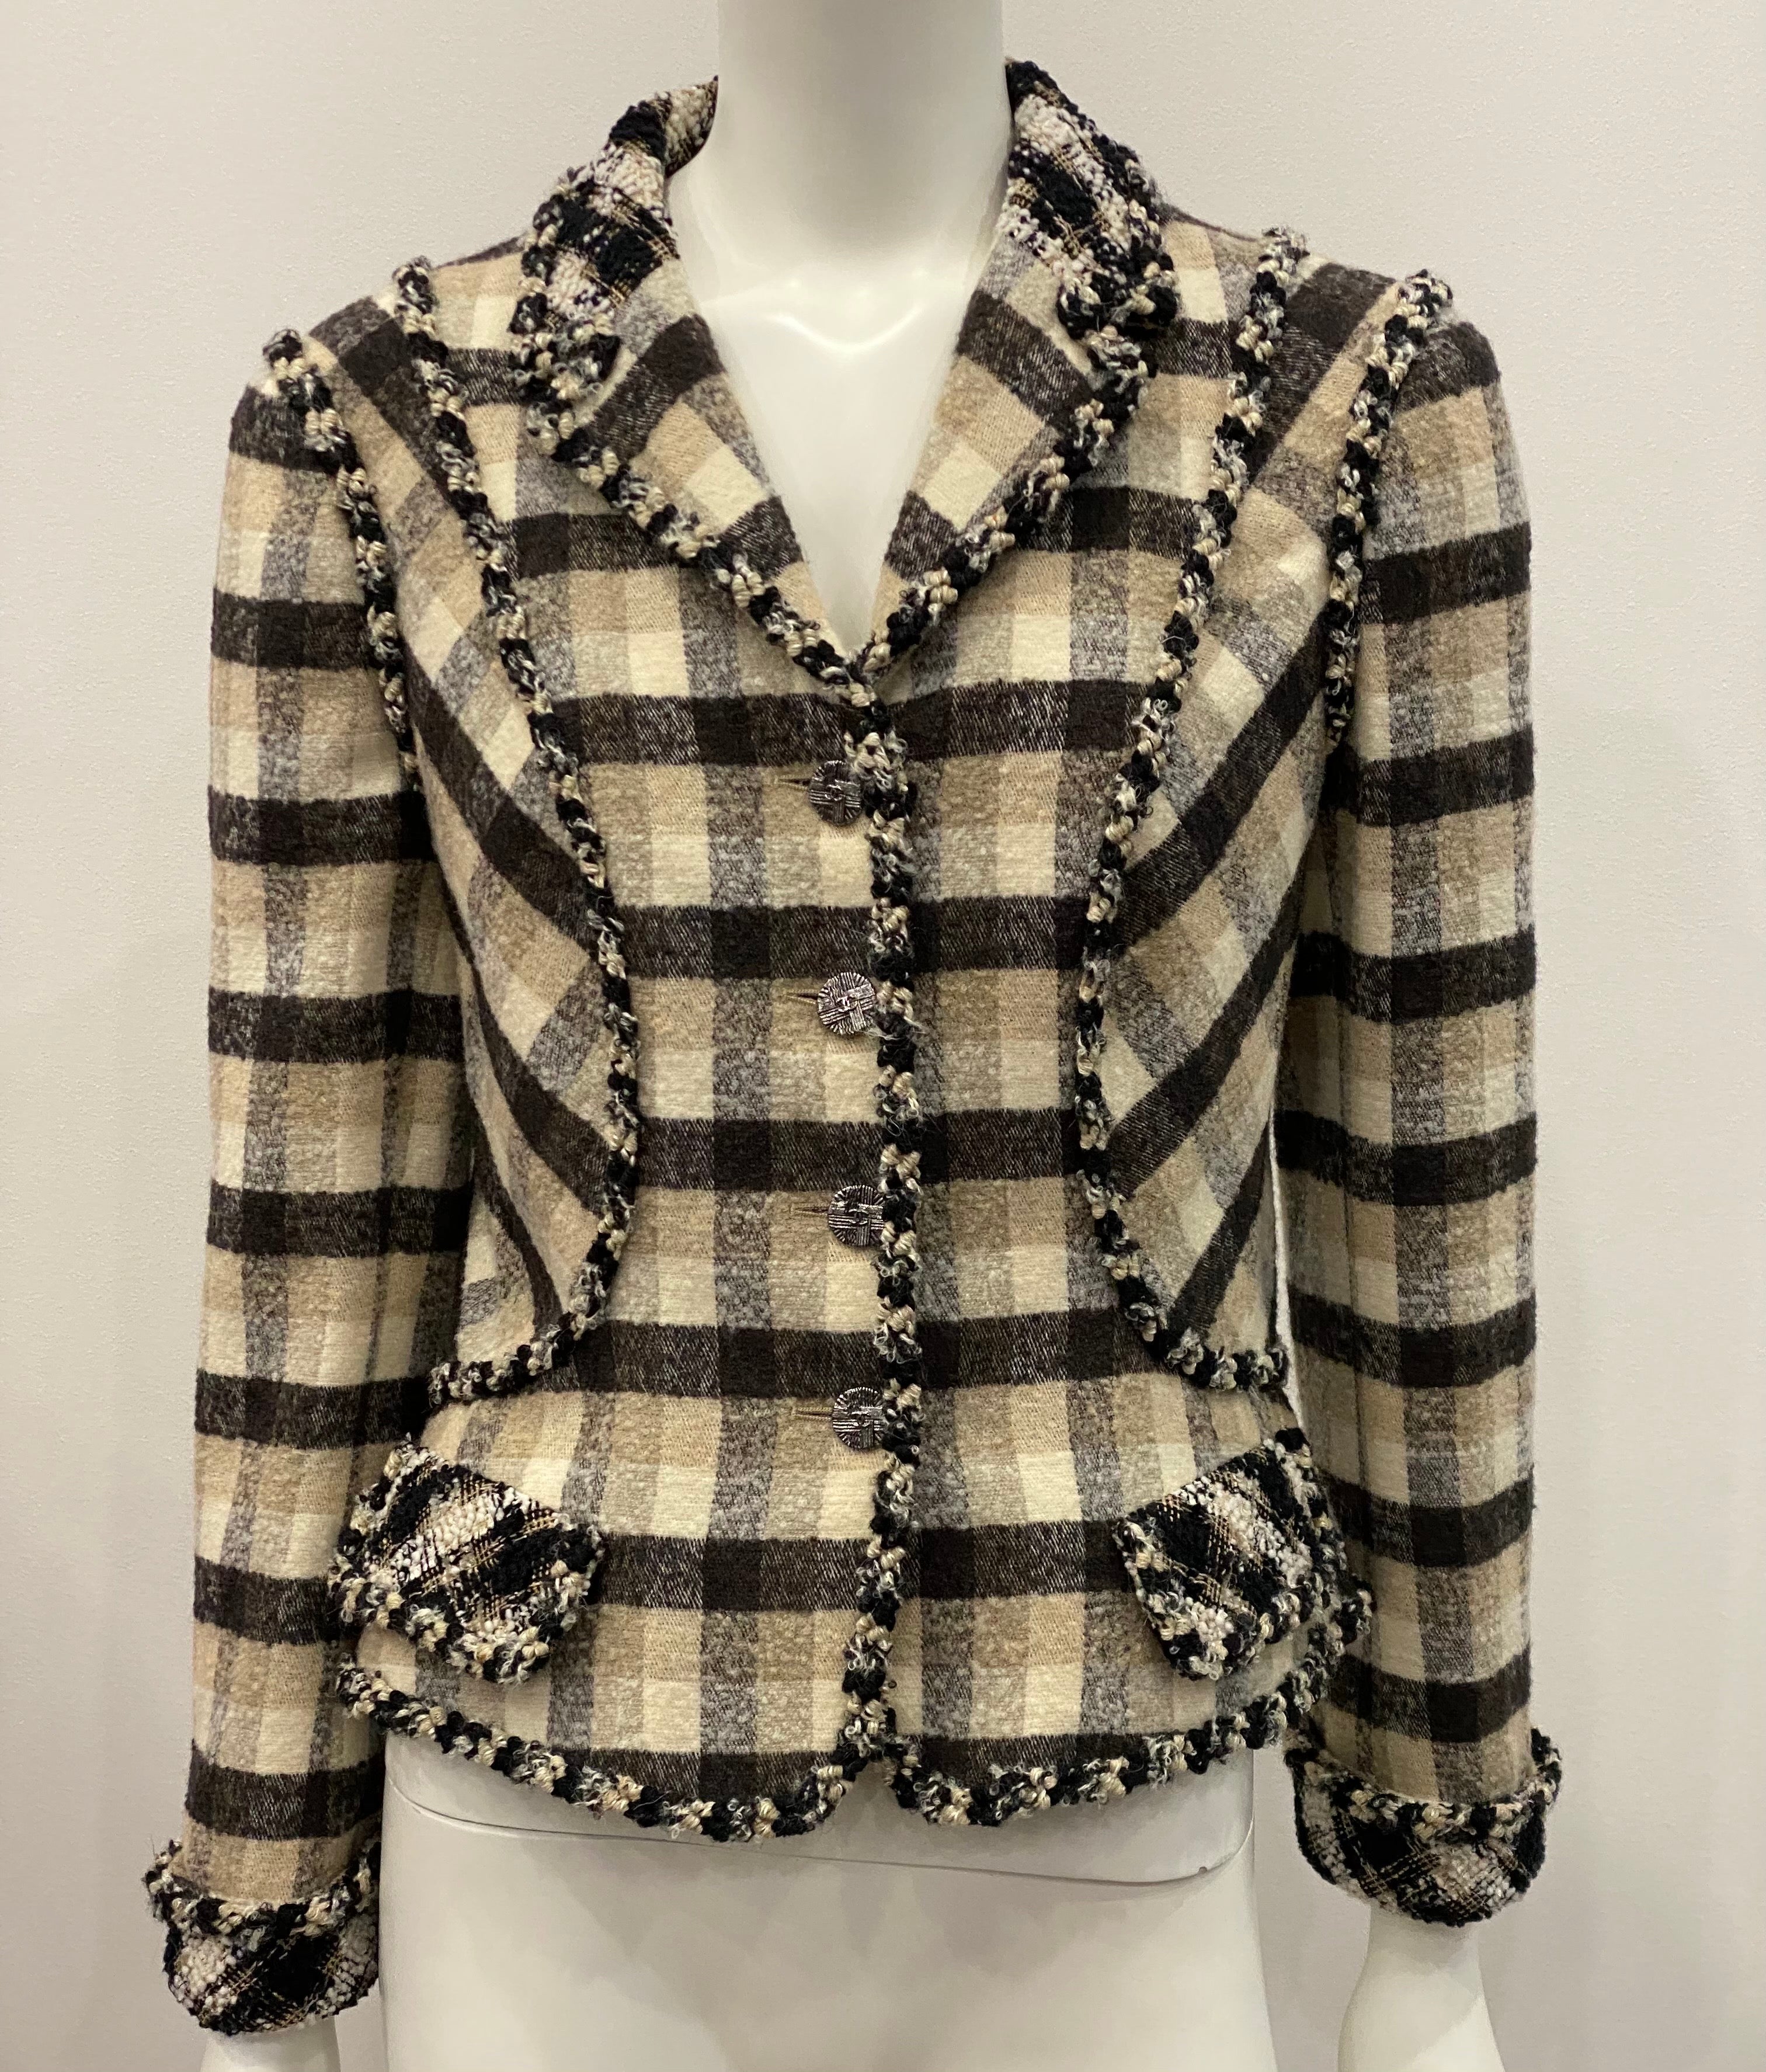 Chanel Tan/Black/Ivory Plaid Wool Blend Jacket - Size 40 - Circa 06A This spectacular Chanel piece from the 2006 Autumn Collection is a one of a kind. The jacket has 4 front Silver/Gunmetal buttons with 2 Flap and Button Hole Functional Pocket. The